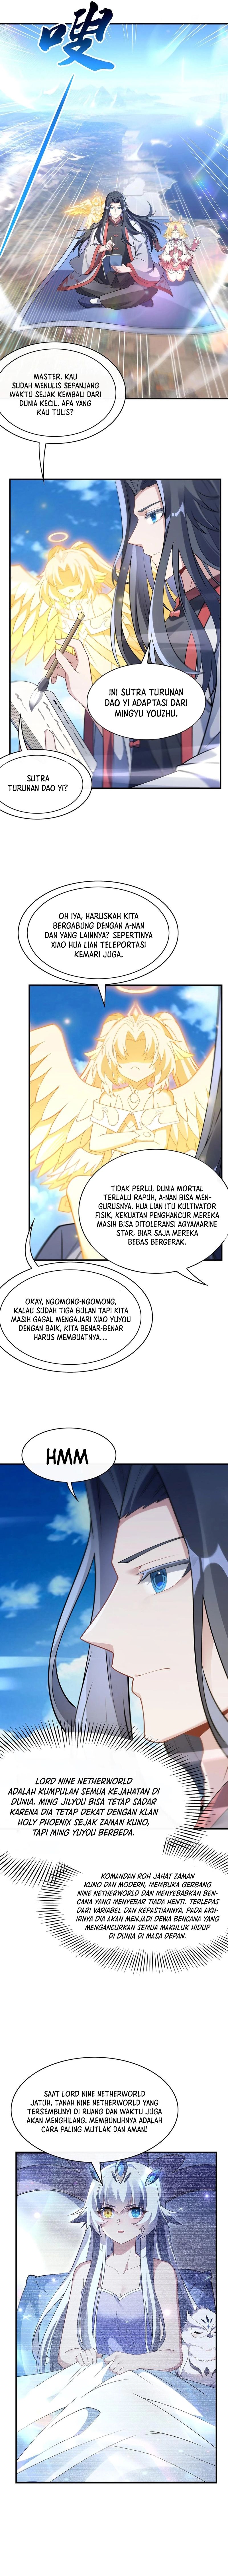 Dilarang COPAS - situs resmi www.mangacanblog.com - Komik my female apprentices are all big shots from the future 260 - chapter 260 261 Indonesia my female apprentices are all big shots from the future 260 - chapter 260 Terbaru 6|Baca Manga Komik Indonesia|Mangacan